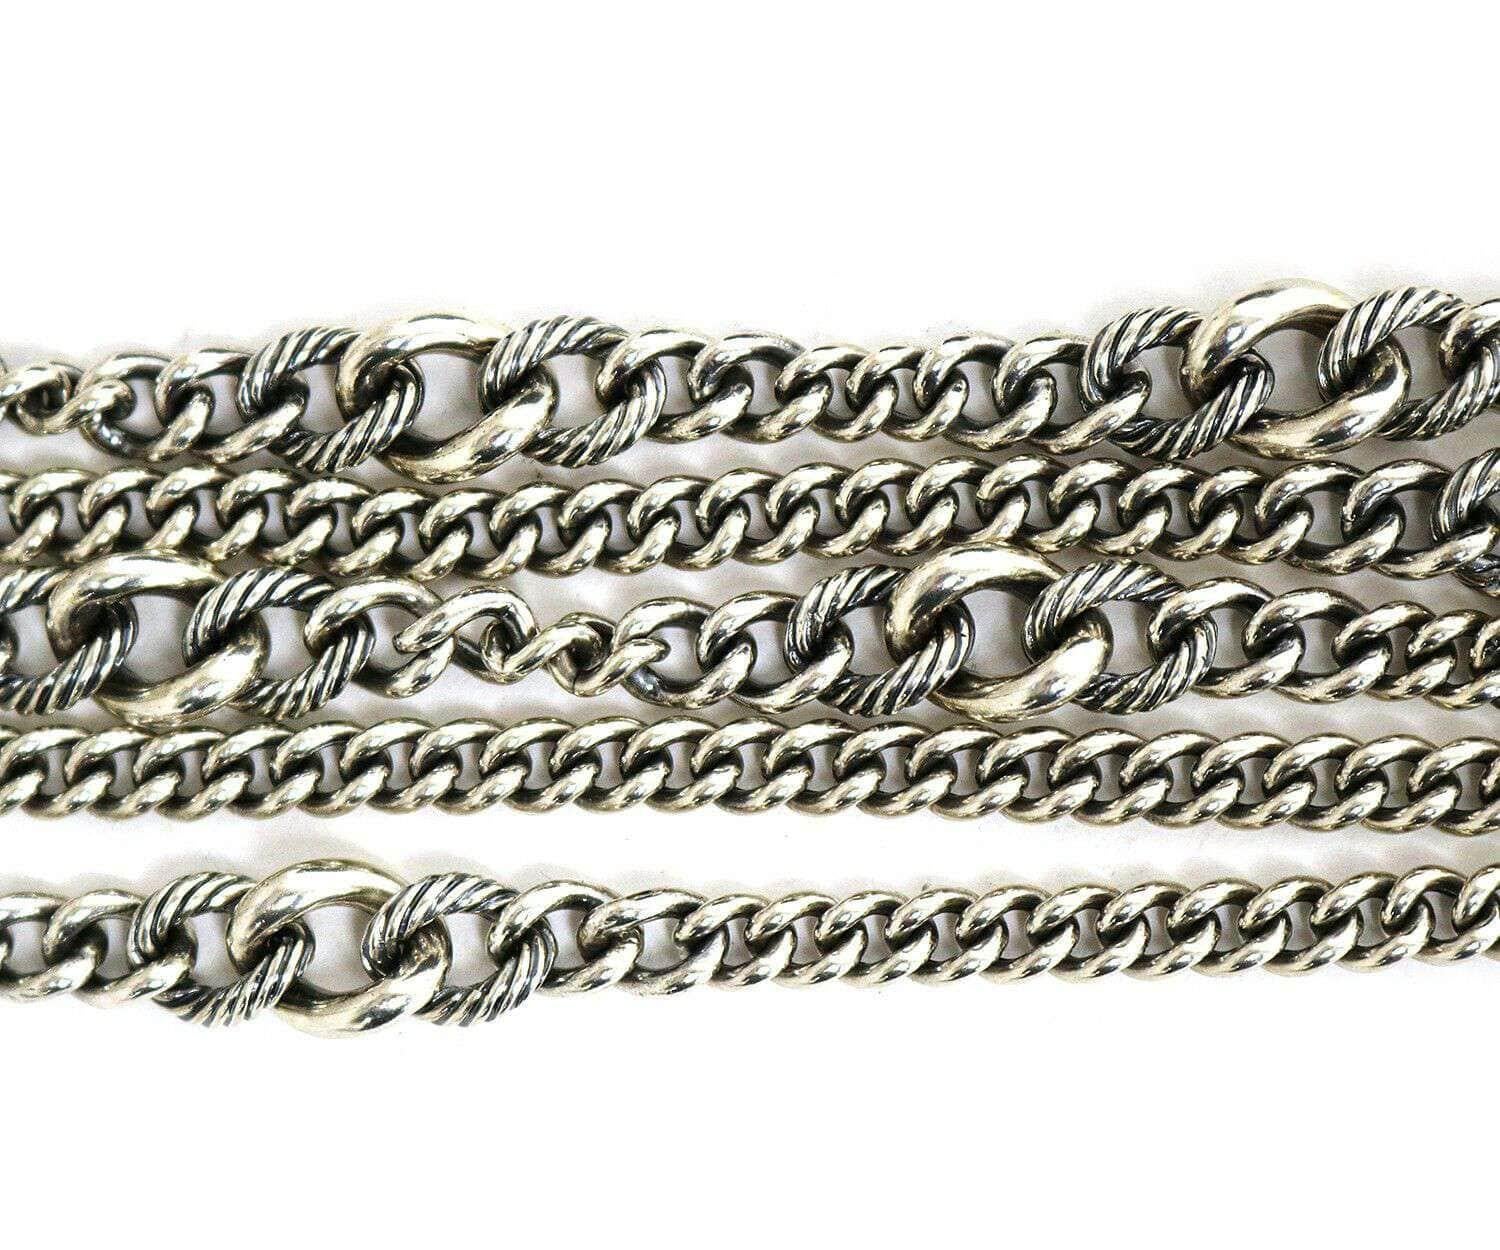 Women's David Yurman 5 Row Drape Curb Chain Necklace in Sterling Silver with Box For Sale